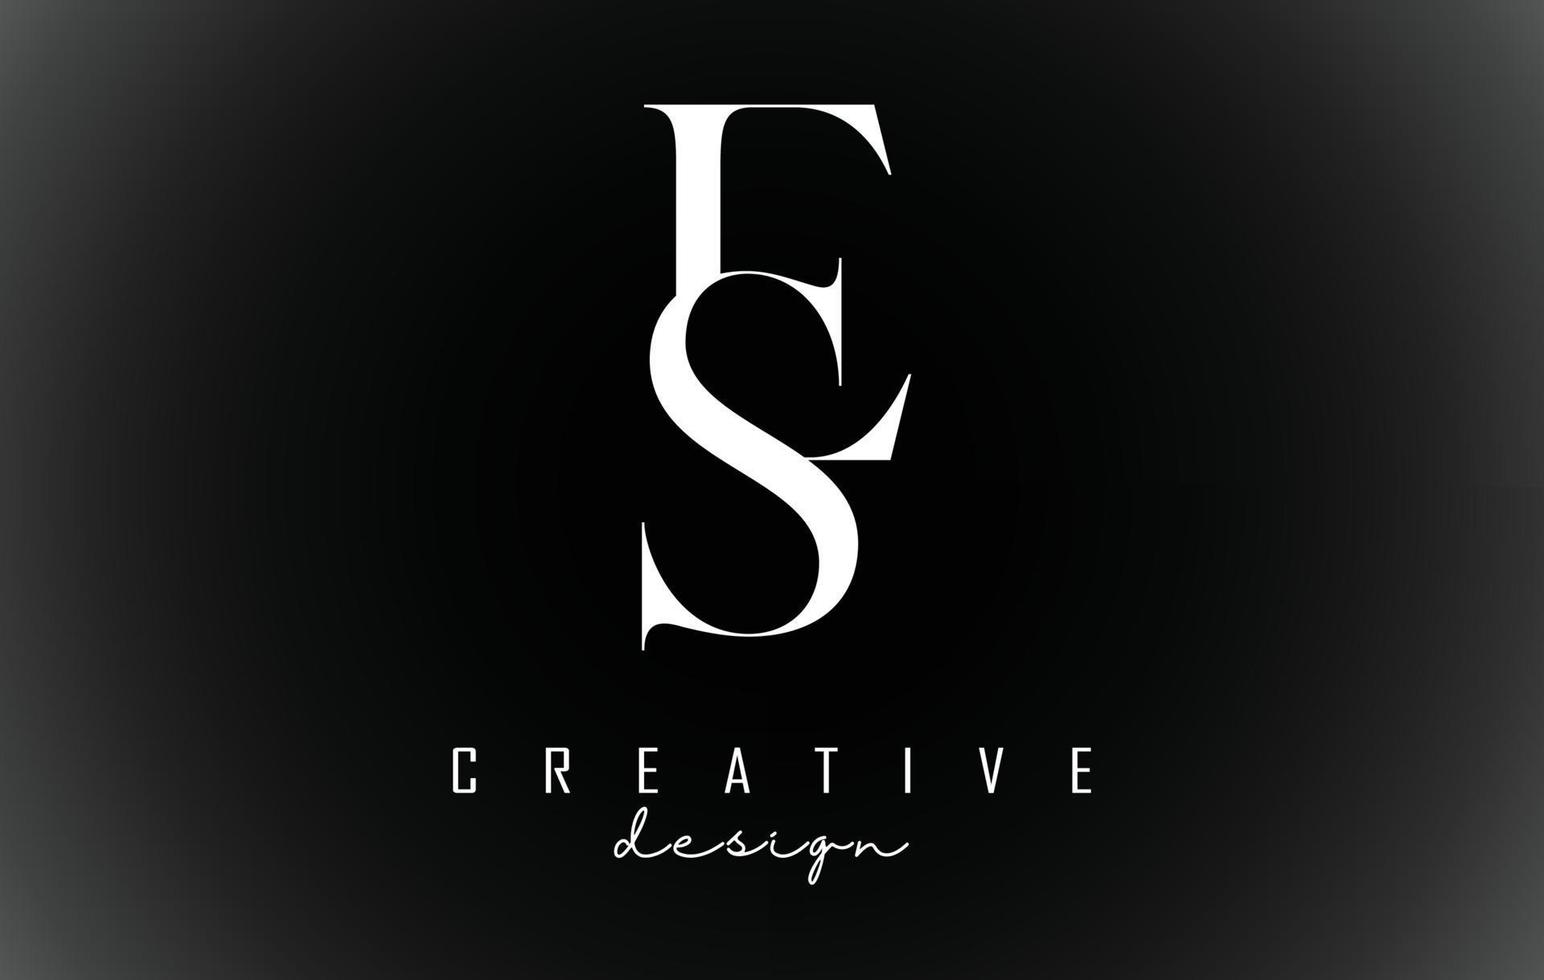 White ES e s letters design logotype concept with serif font and elegant style vector illustration.